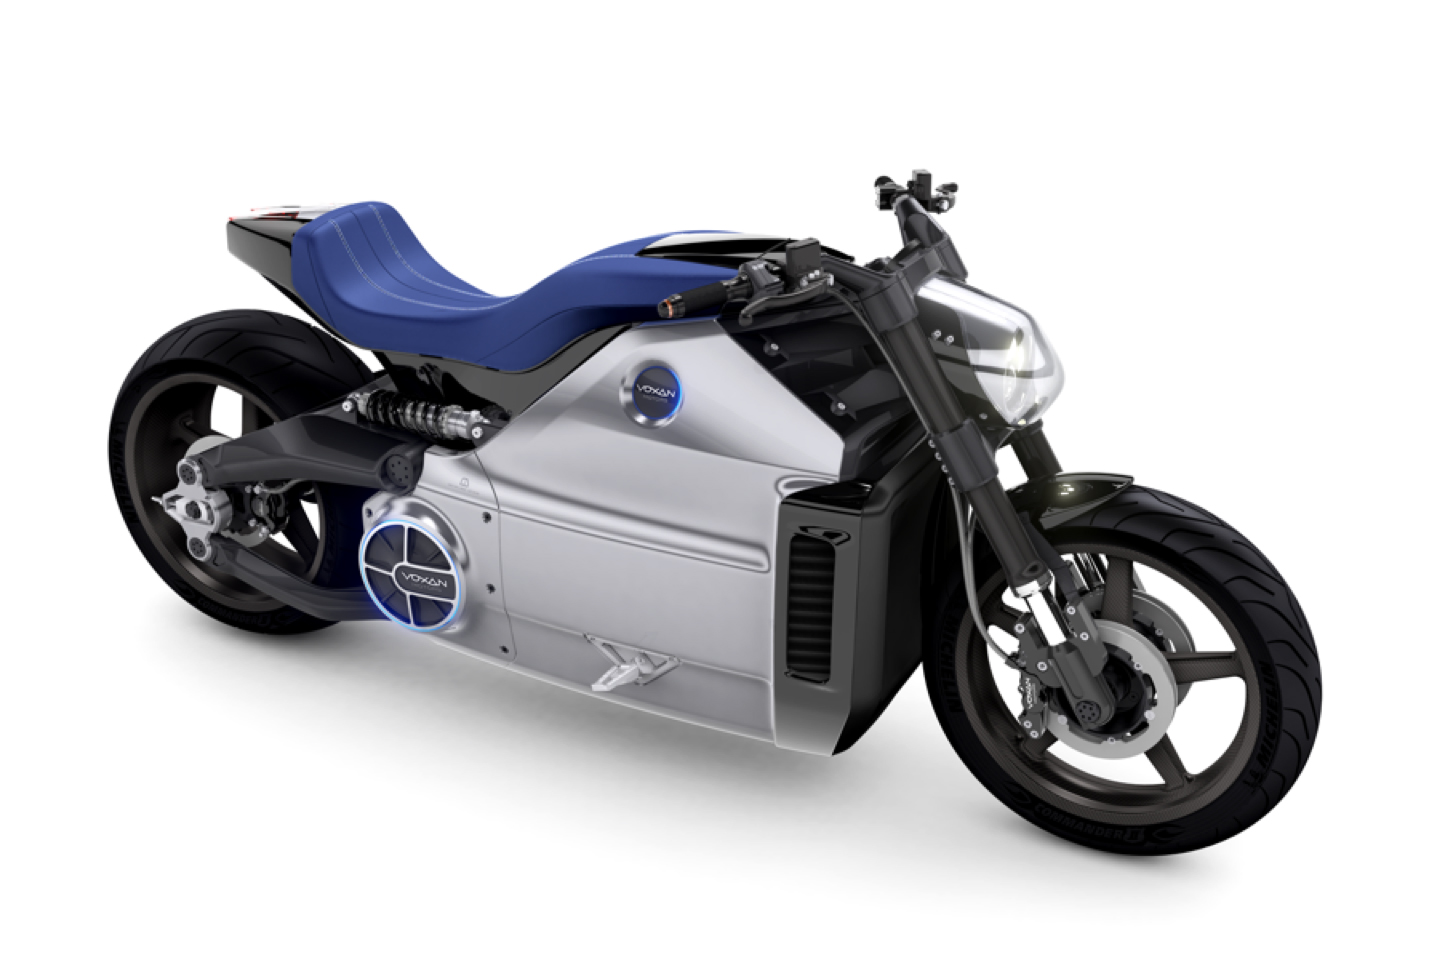 World’s Most Powerful Electric Motorcycle Looks Like The Future